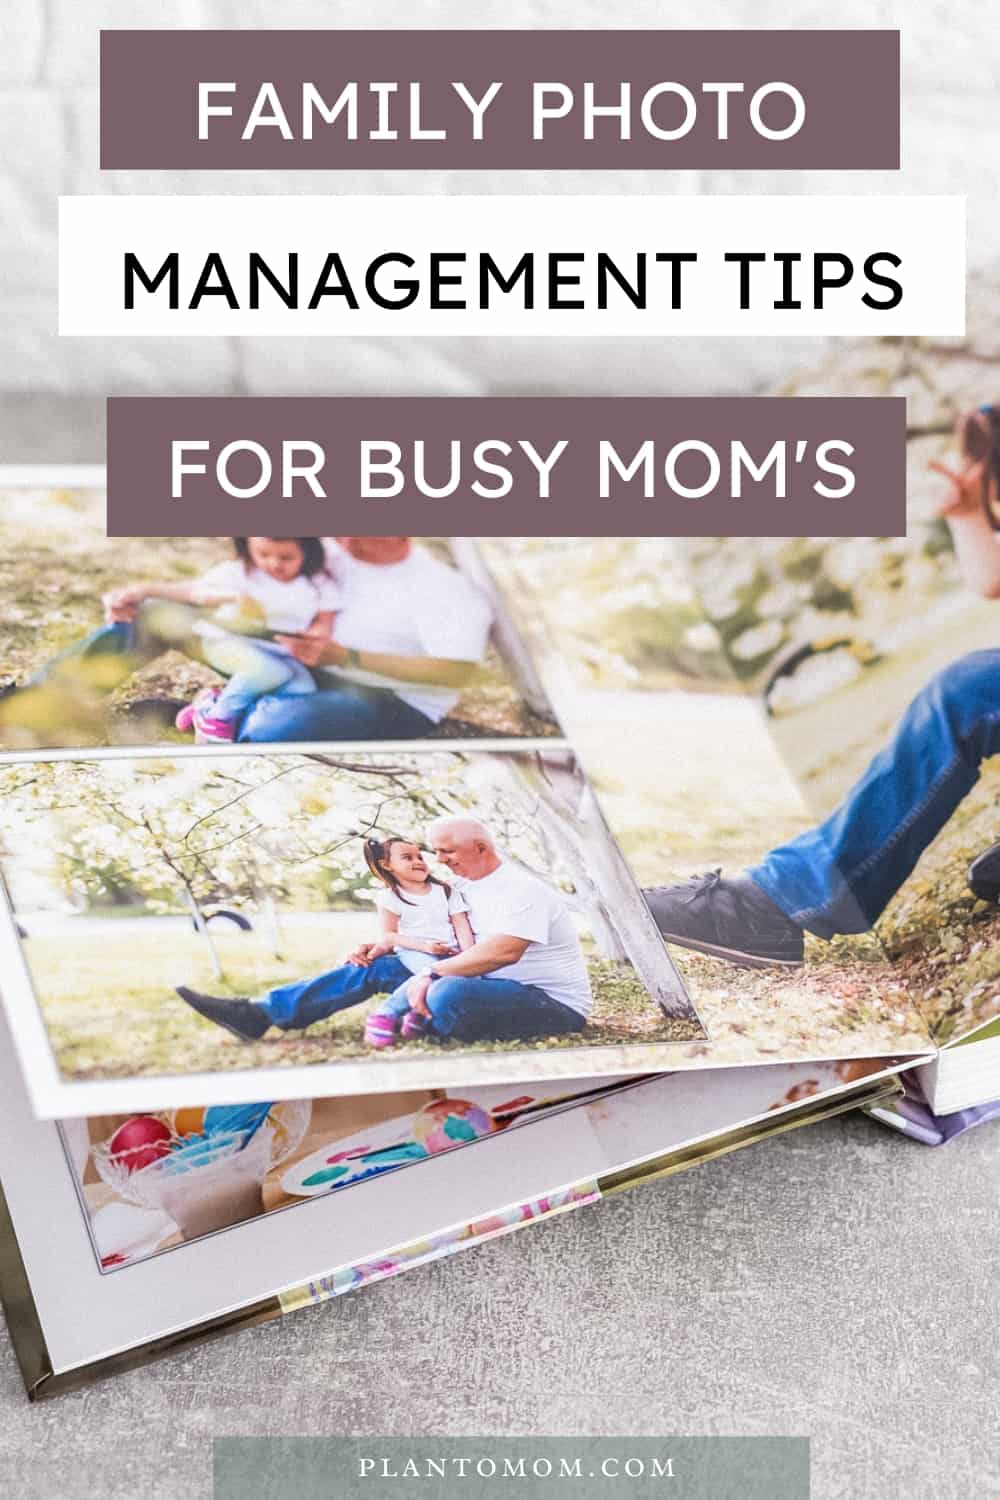 Family photo management tips for busy Mom's